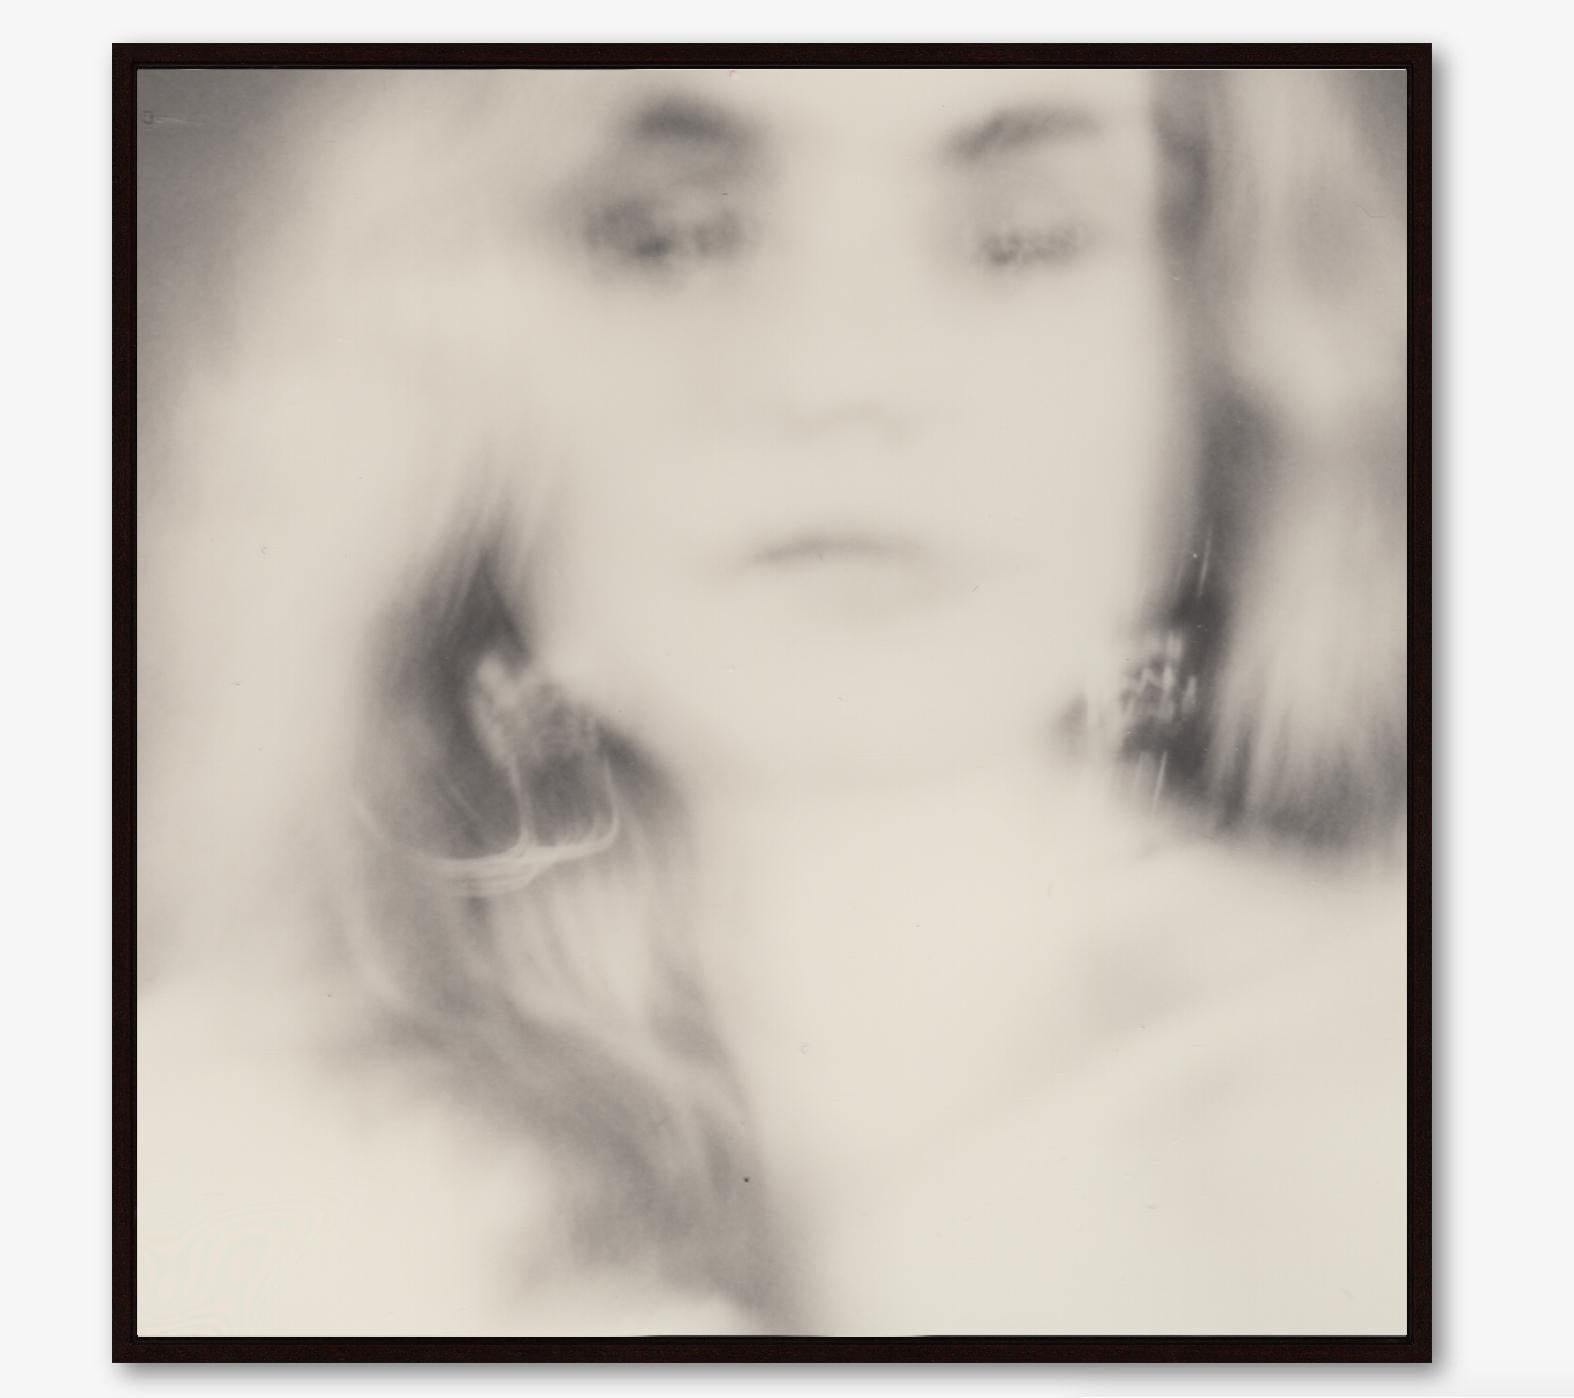 The Muse II - Following Mozart's Inspiration & Music in a Photographic Journey - Beige Figurative Photograph by Pia Clodi